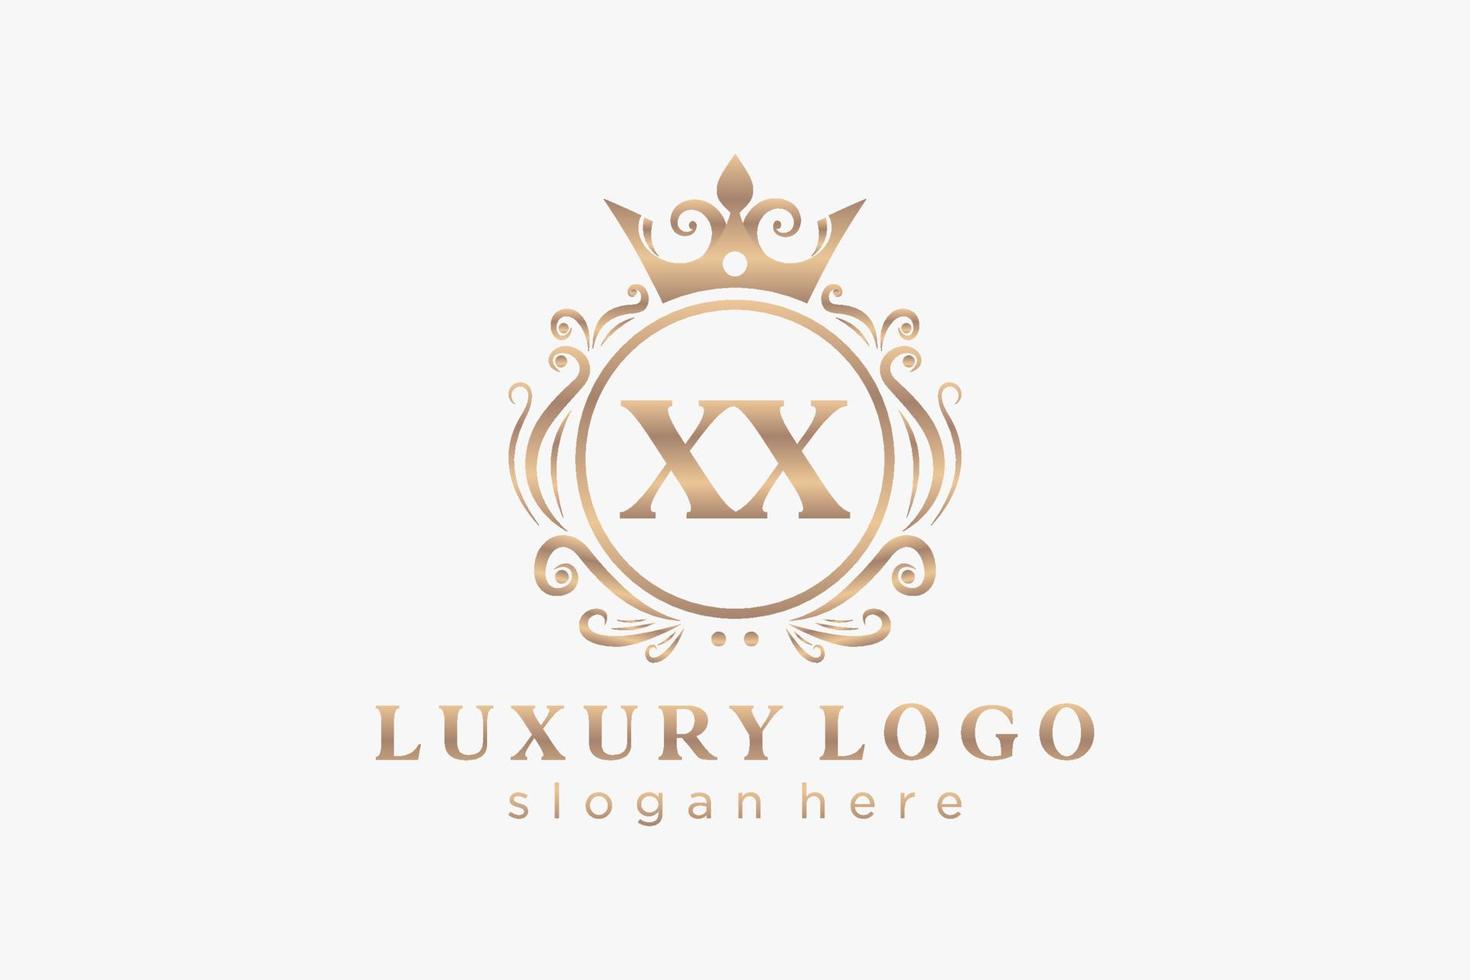 Initial XX Letter Royal Luxury Logo template in vector art for Restaurant, Royalty, Boutique, Cafe, Hotel, Heraldic, Jewelry, Fashion and other vector illustration.